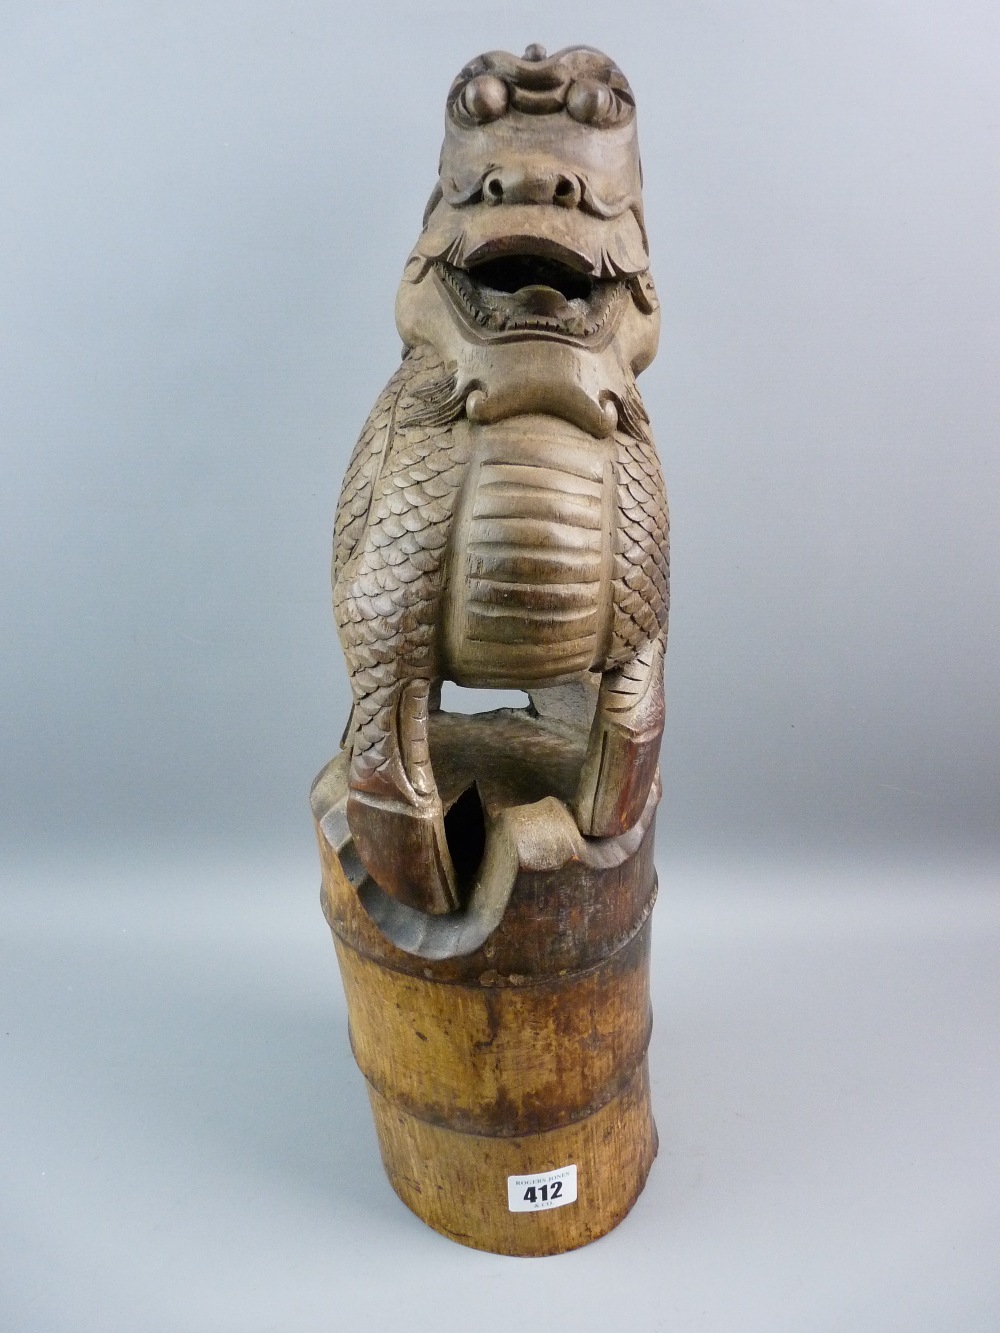 A CARVED BAMBOO FIGURE OF QILIN (Chinese Unicorn), a mythical beast symbolizing good luck and